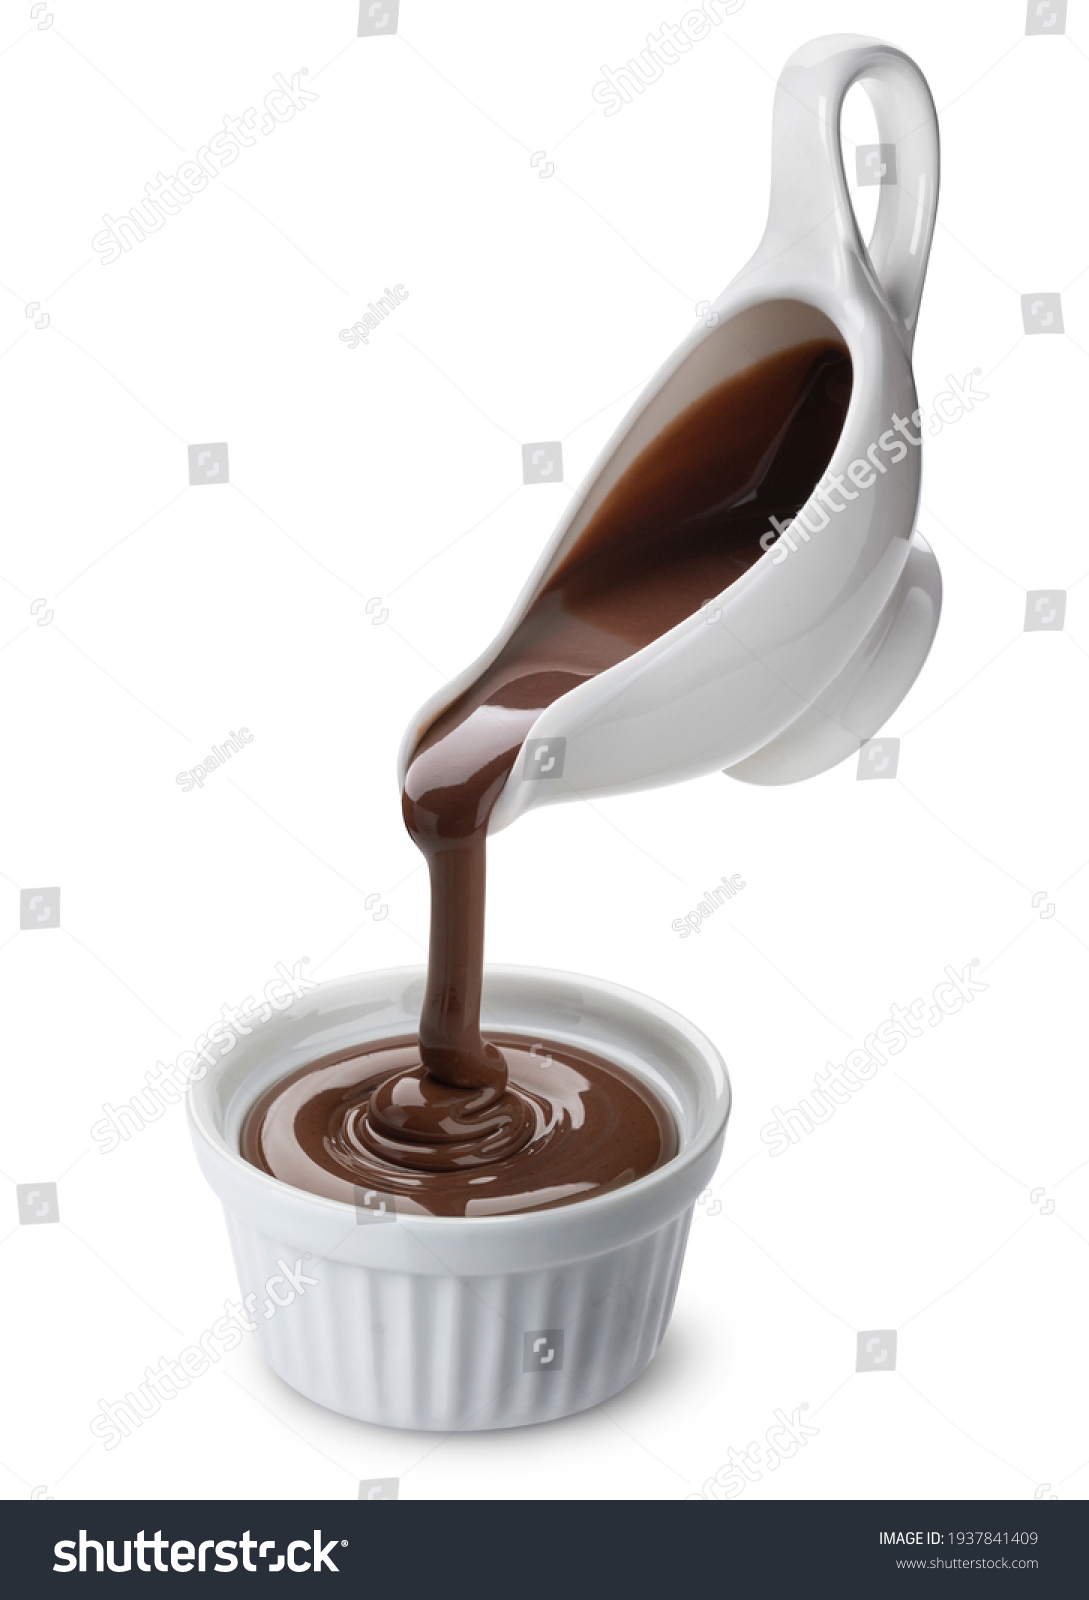 Pouring melted chocolate isolated on white background with clipping path #1937841409